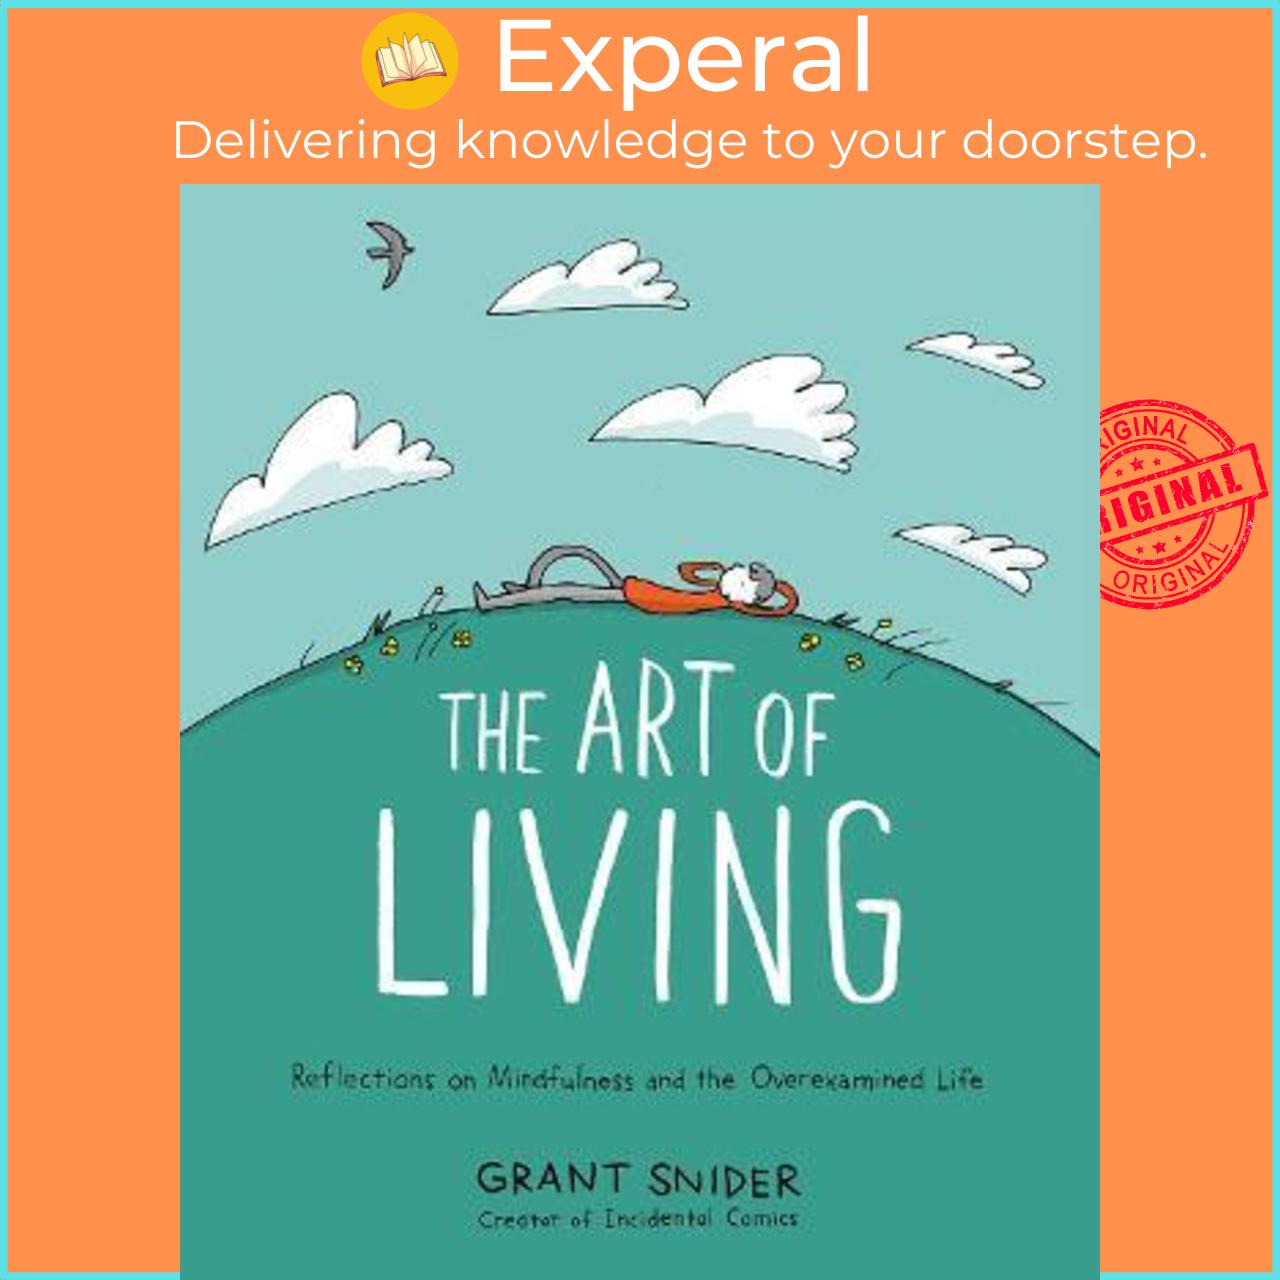 Sách - The Art of Living: Reflections on Mindfulness and the Overexamined Life by Grant Snider (US edition, hardcover)